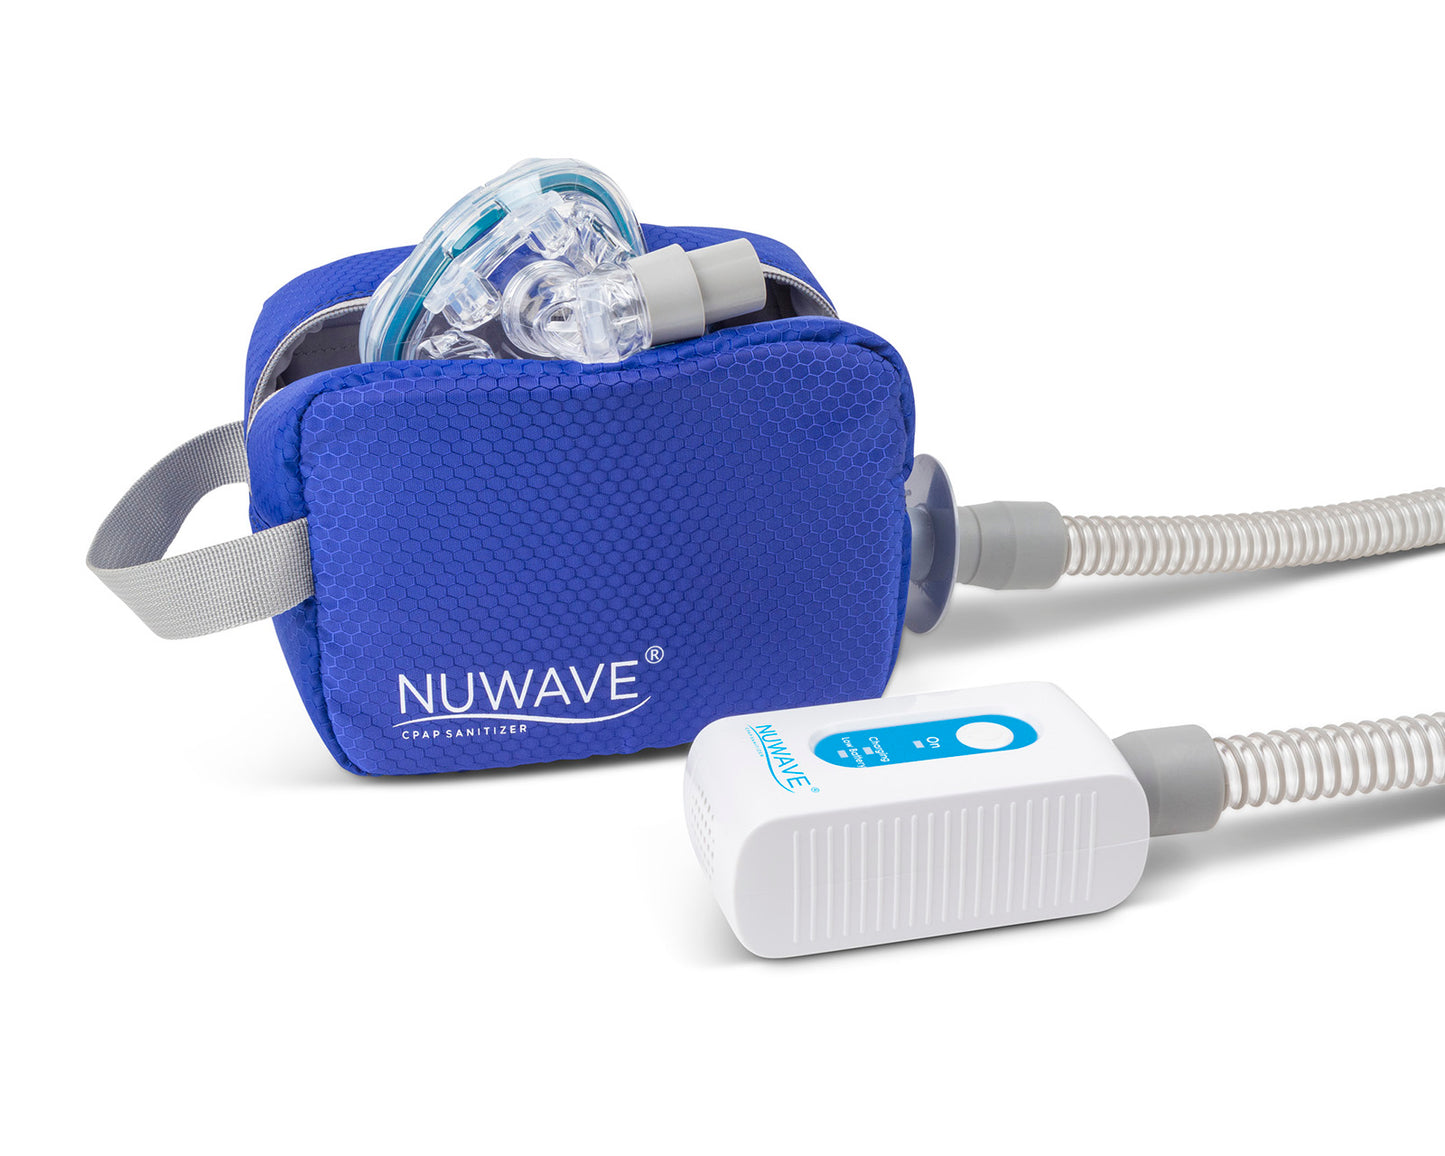 White with blue part CPAP machine cleaner in travel size with open travel blue bag by Western Medical Inc.